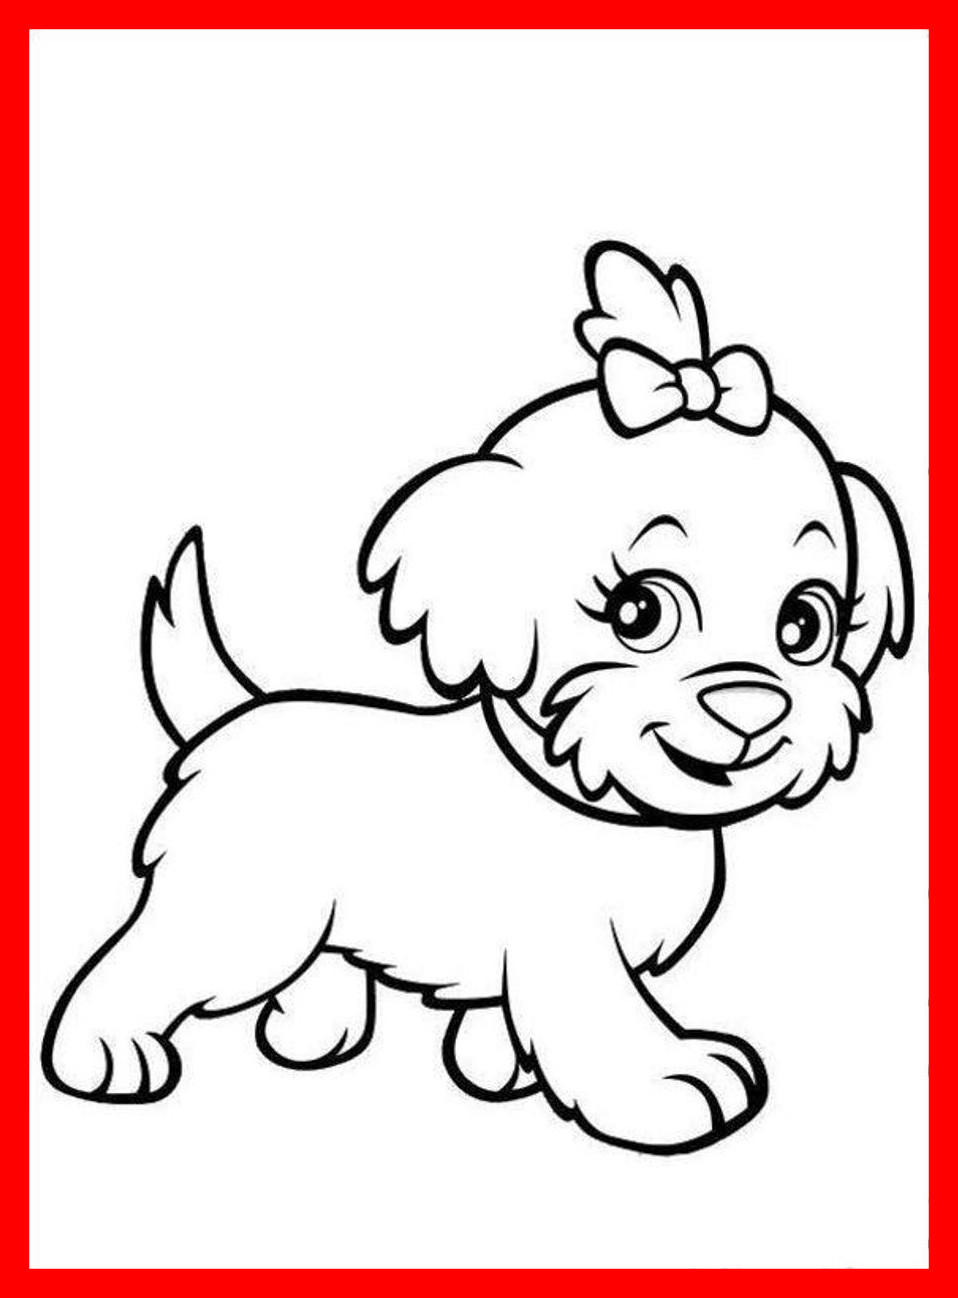 Frisbee Coloring Page at GetDrawings | Free download